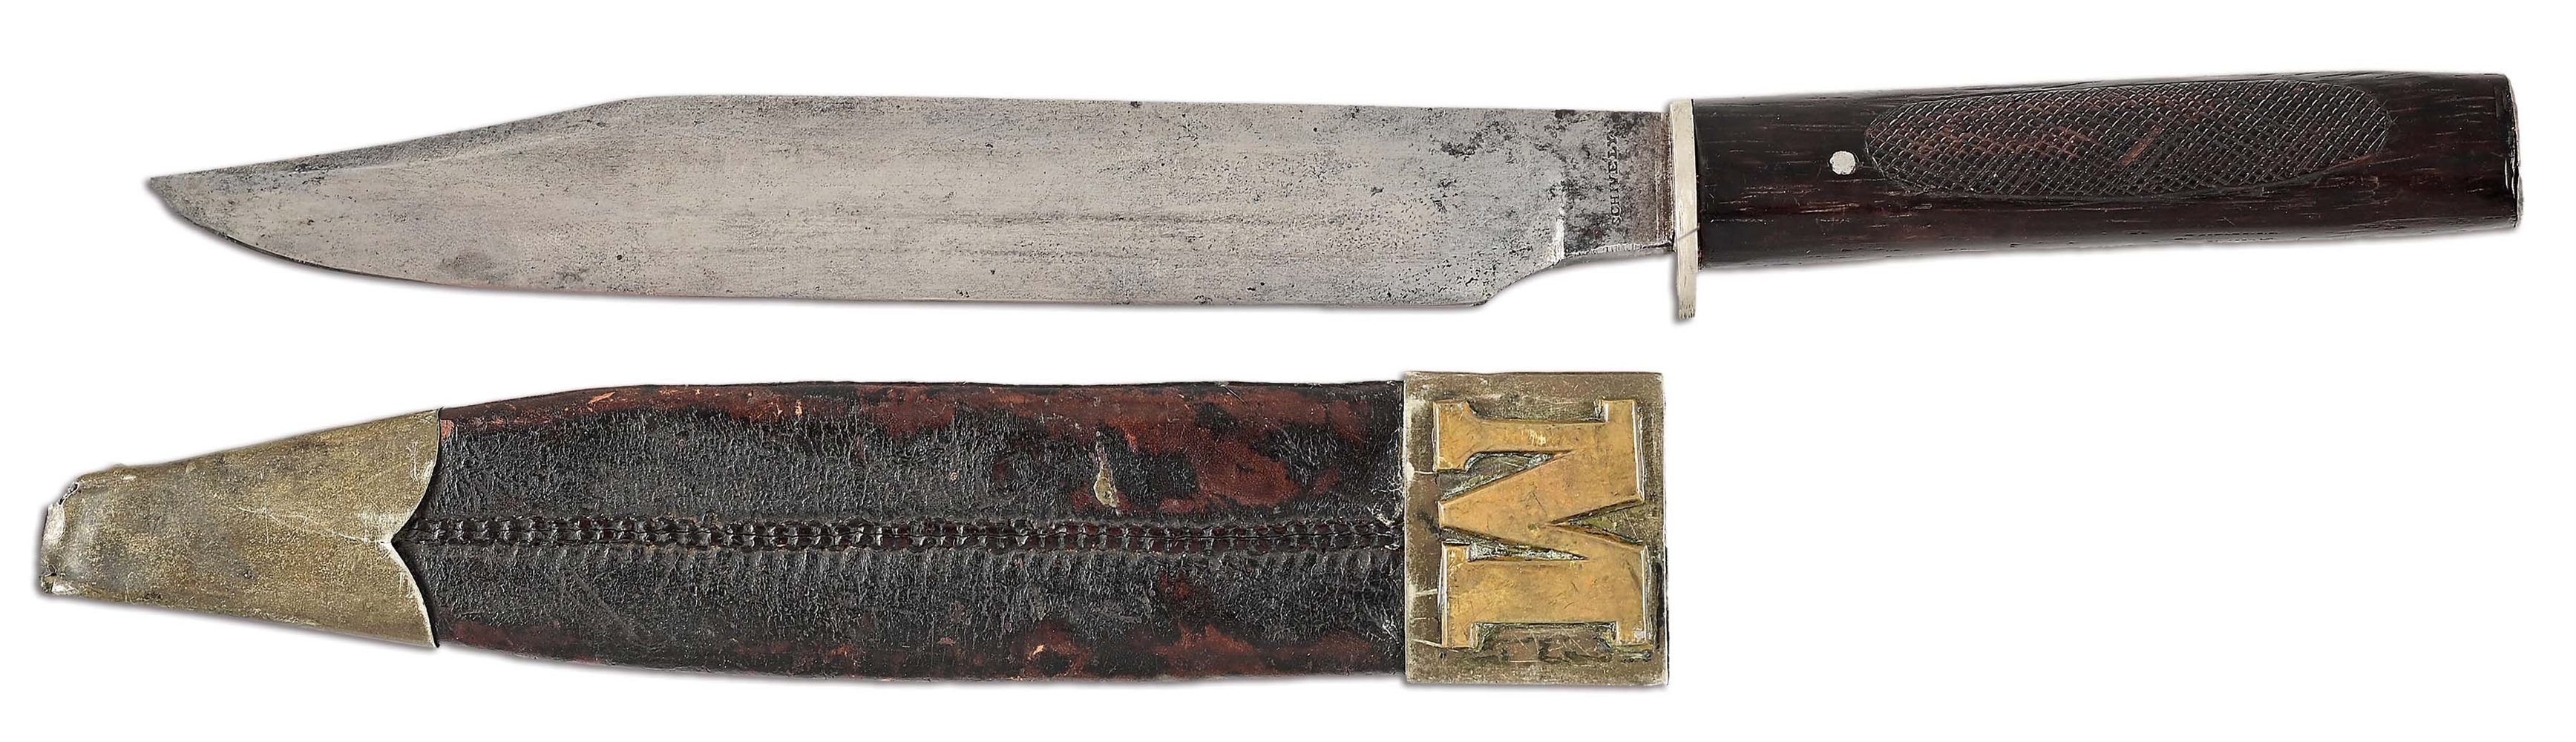 RARE BOWIE KNIFE BY SCHIVELY OF PHILADELPHIA.